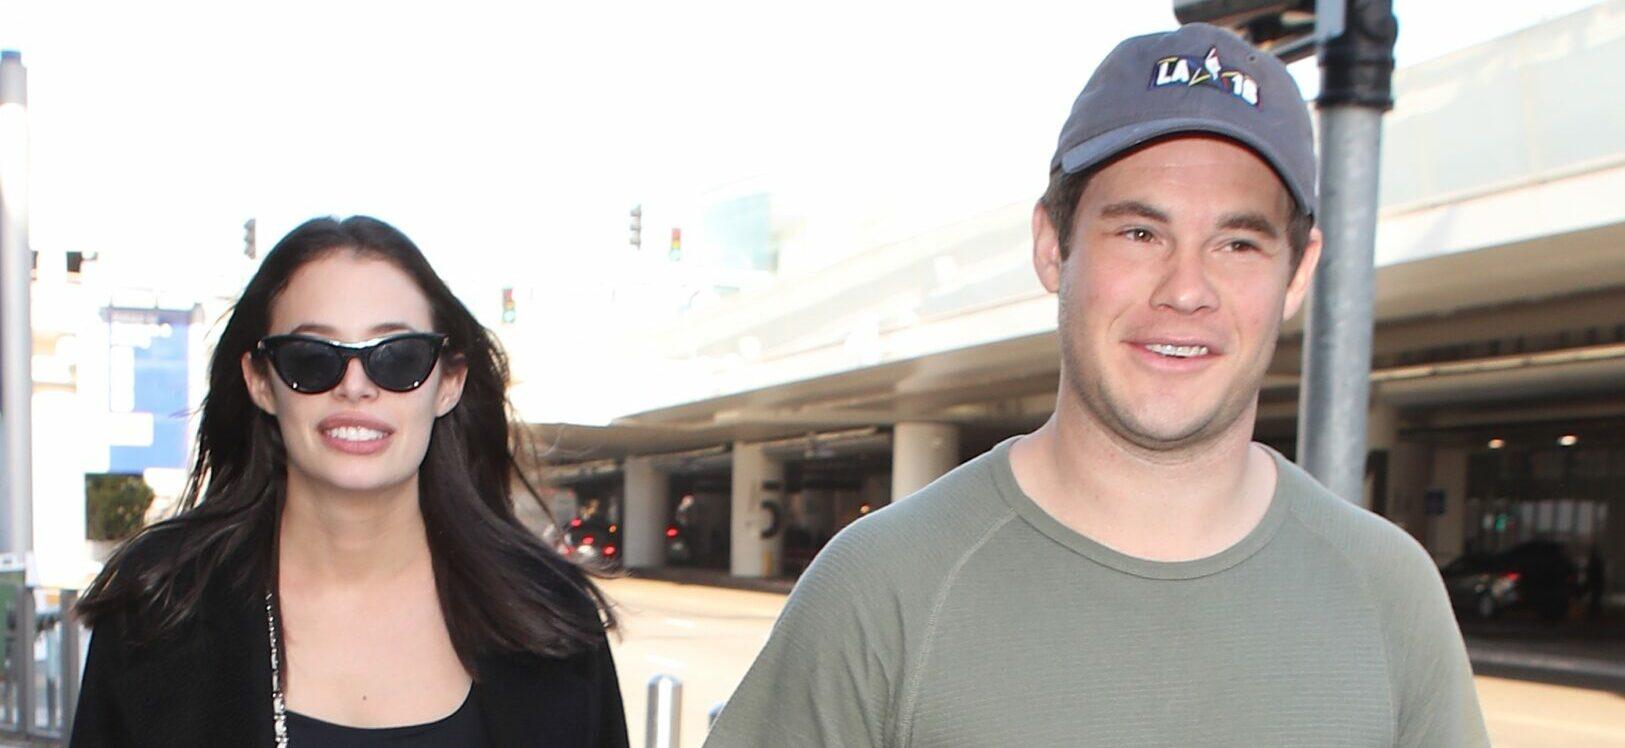 Adam devine and girlfriend Chloe Bridges arrive to LAX after trip to Hawaii